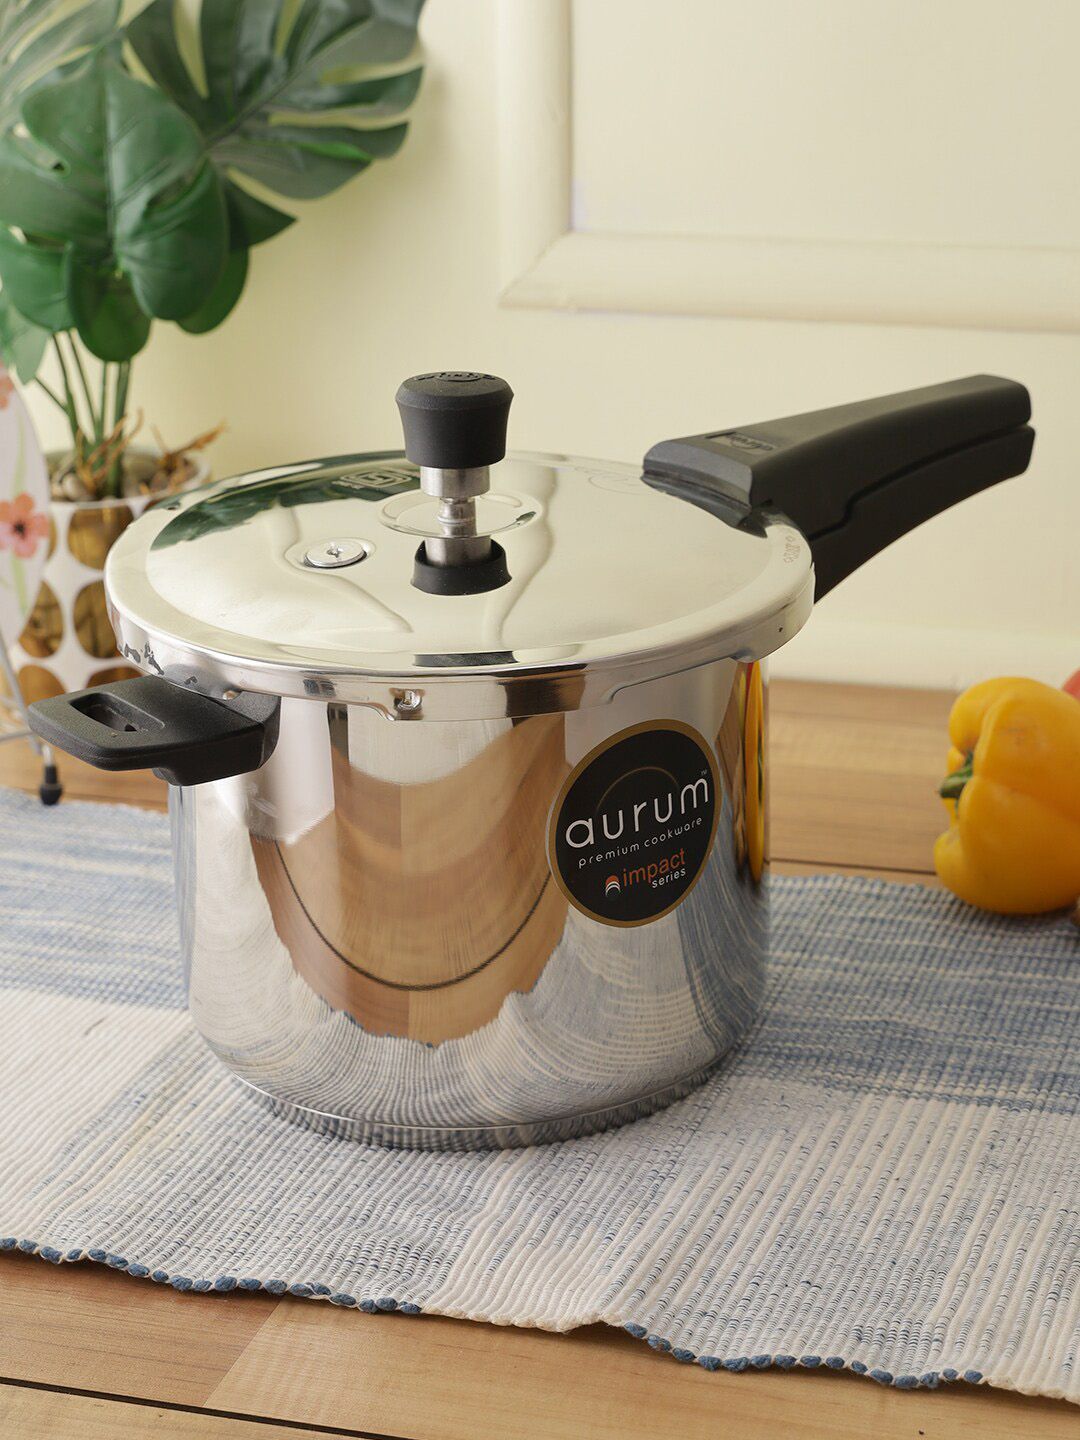 AURUM Silver-Toned & Black Induction Bottom Pressure Cooker Price in India